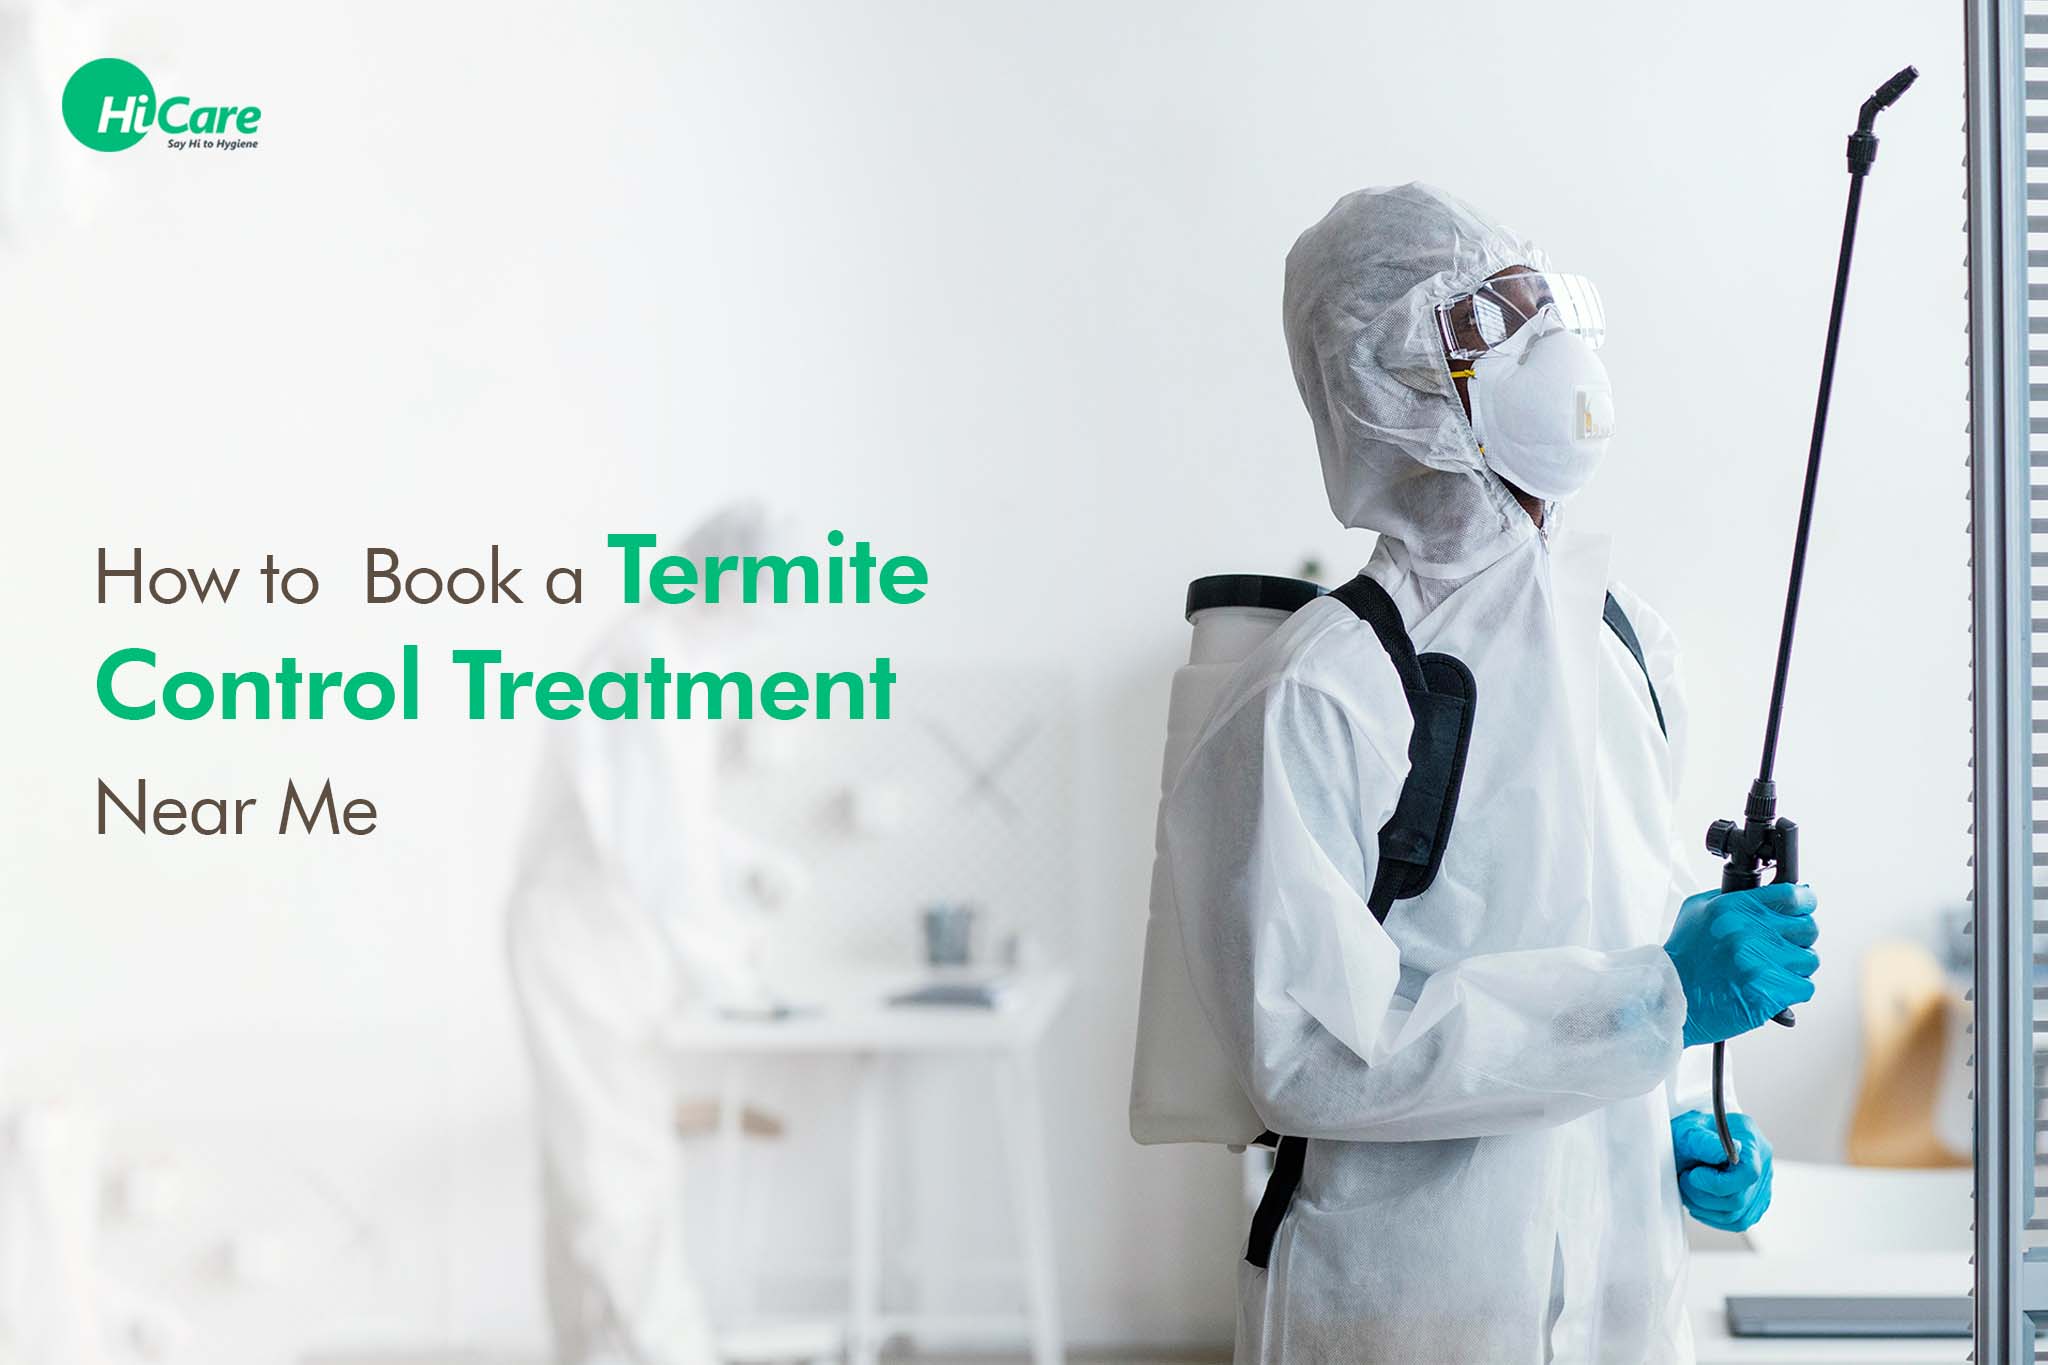 How to Book a Termite Control Treatment Near Me?